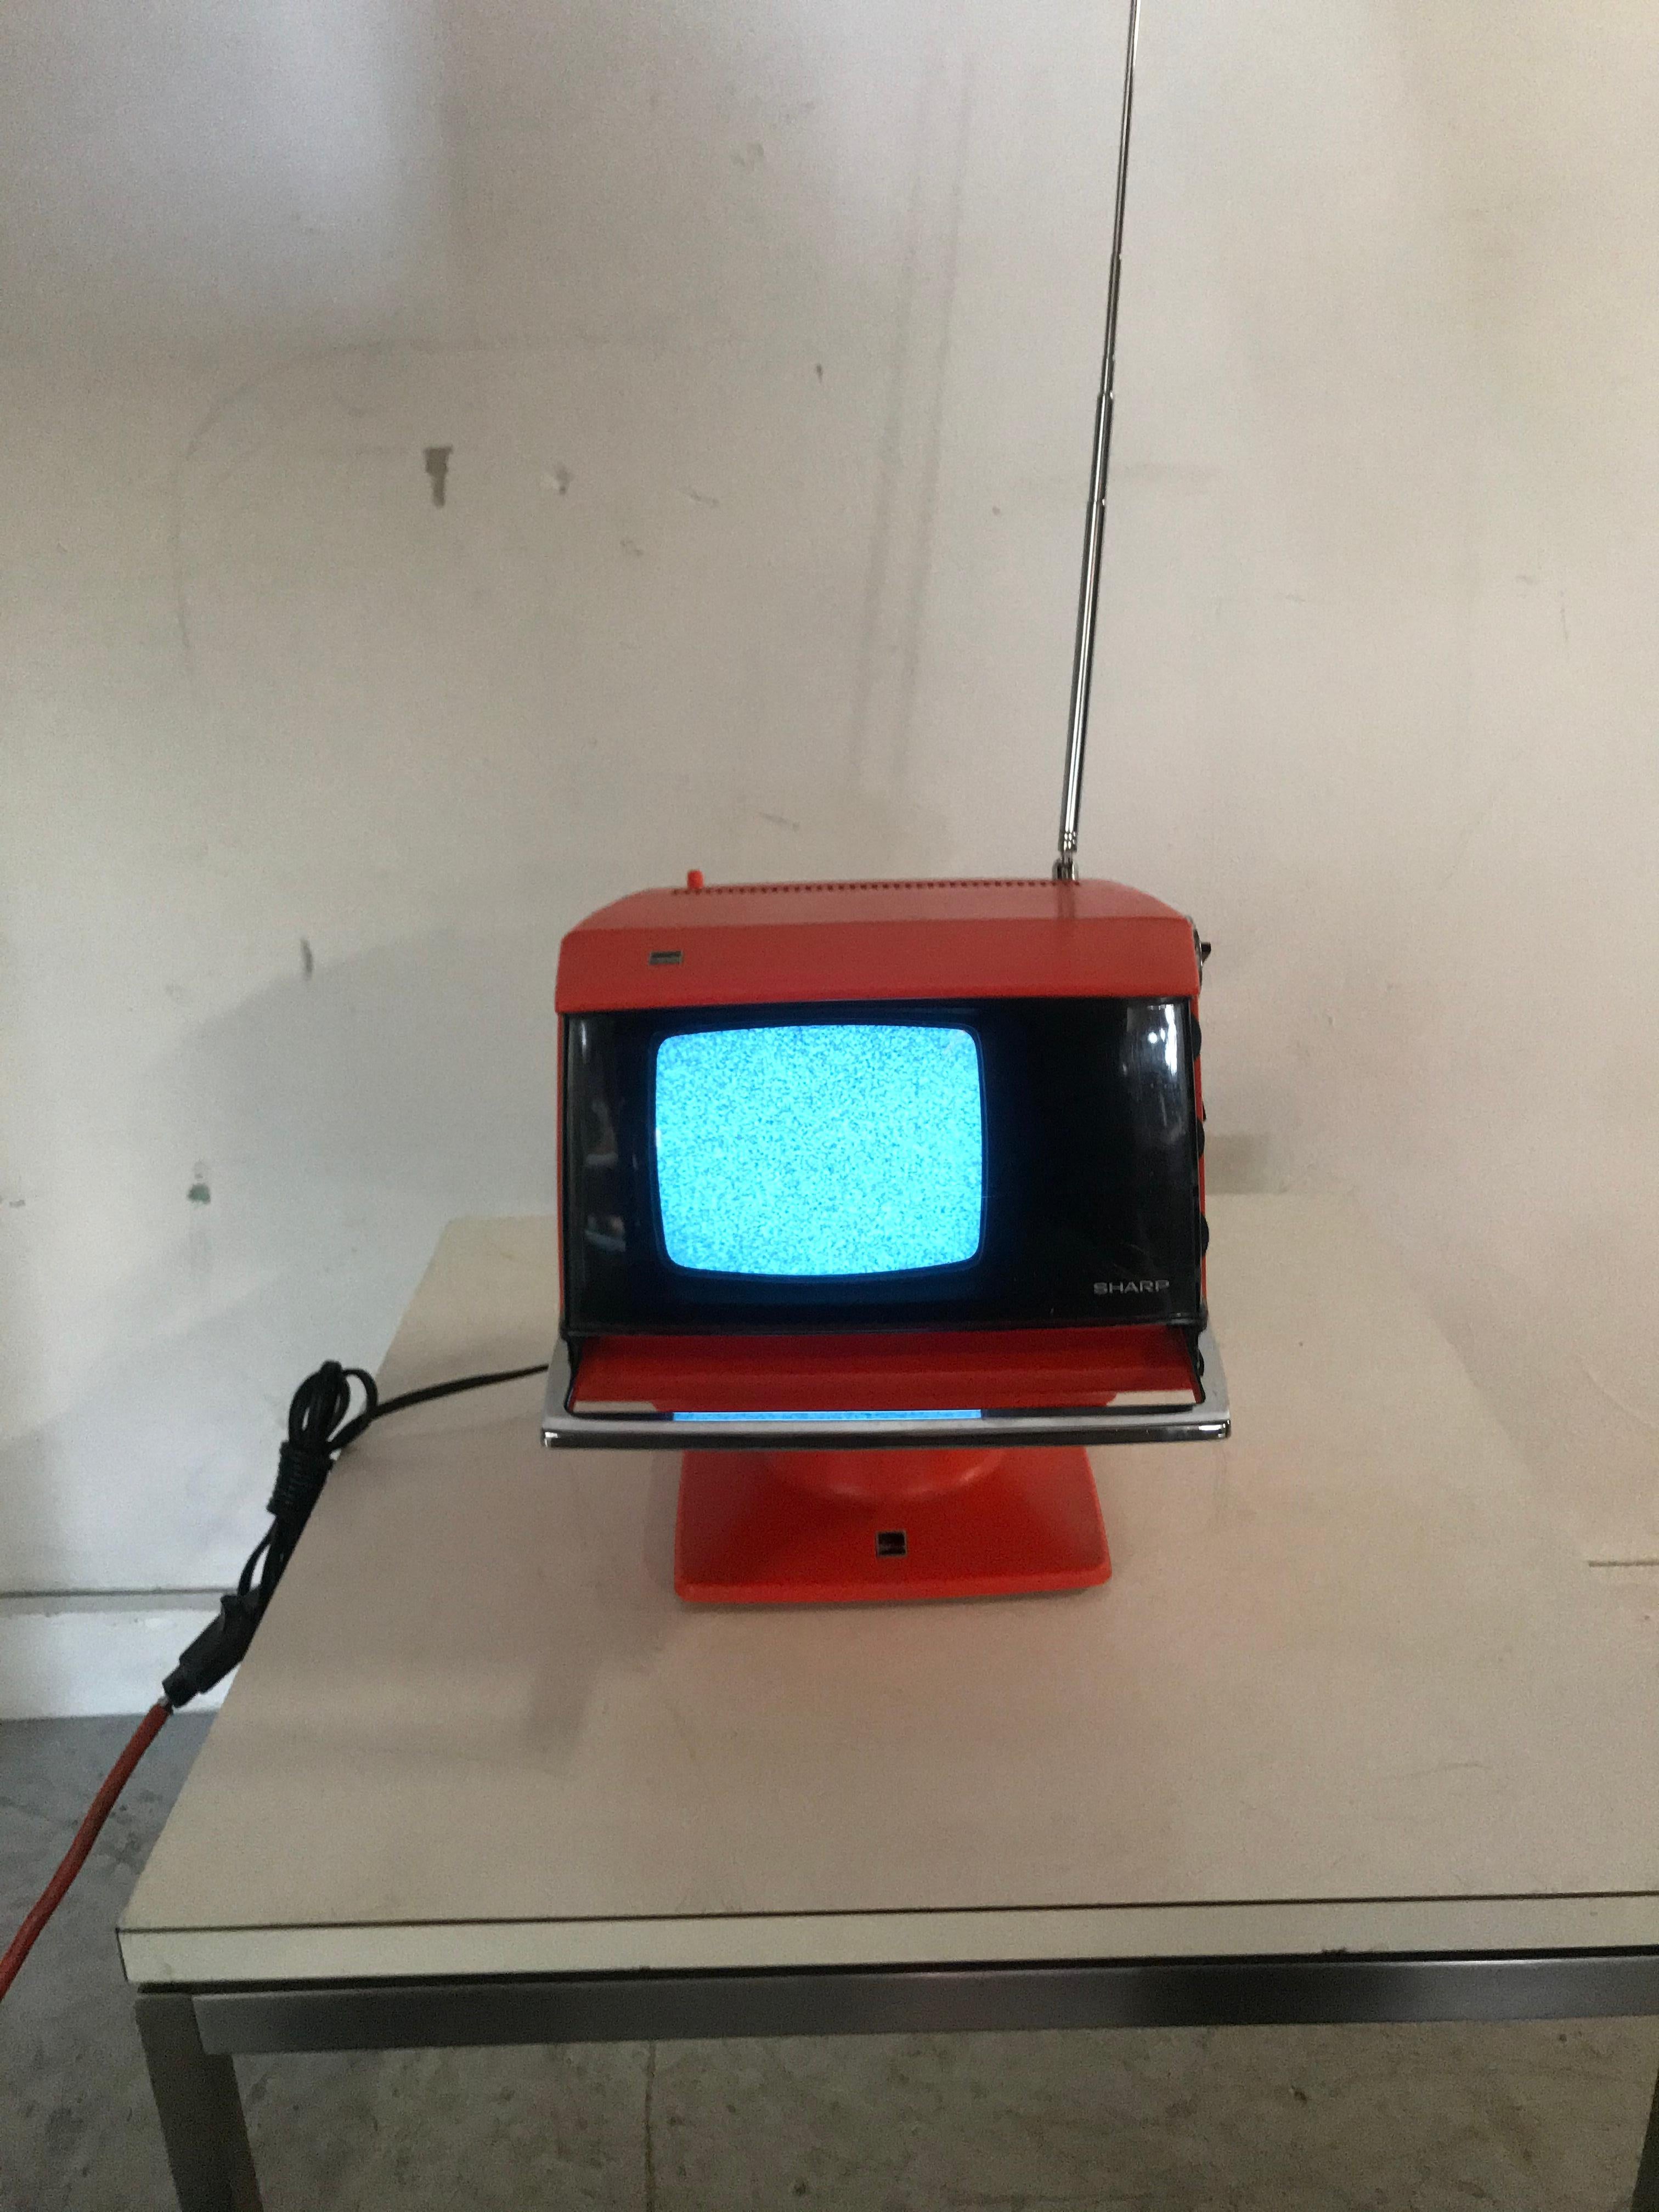 Modernist Space Age sharp television, model 3S-111 R..JAPAN, circa 1970. Amazing design, tested and in wonderful working condition

Note: The TV detaches from the base (which holds the transformer/power) and the chrome bar presses in to release to